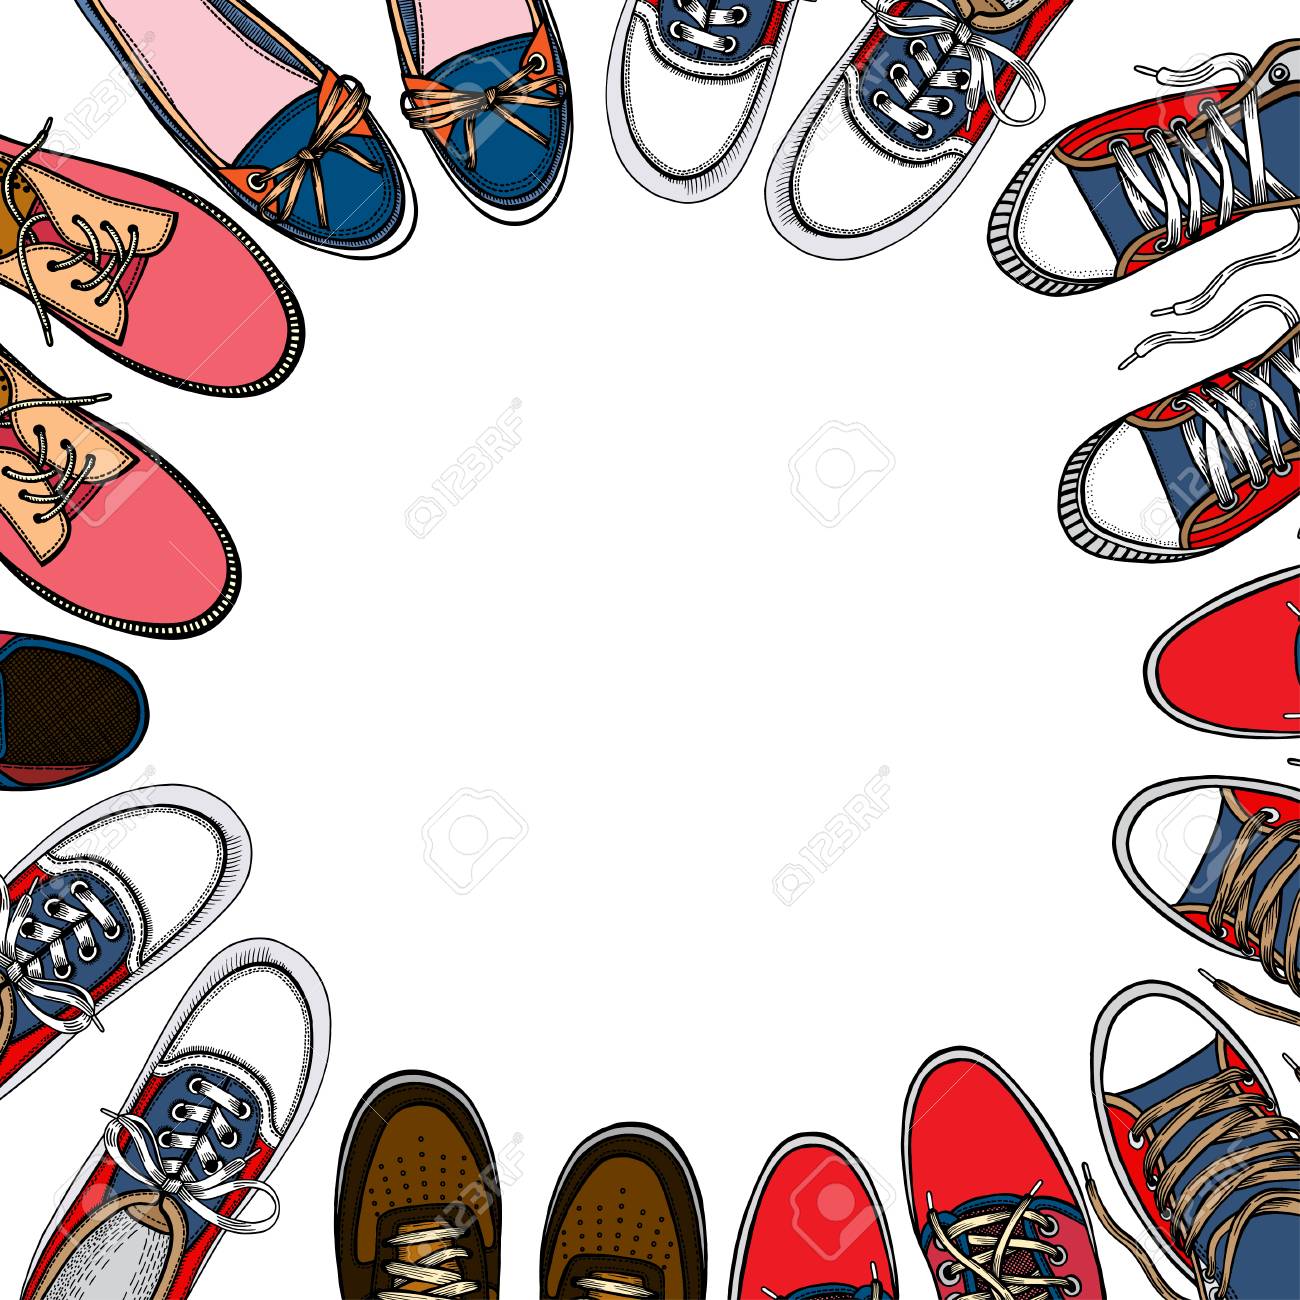 Background Of Many Sports Shoes Lined Up In A Circle With